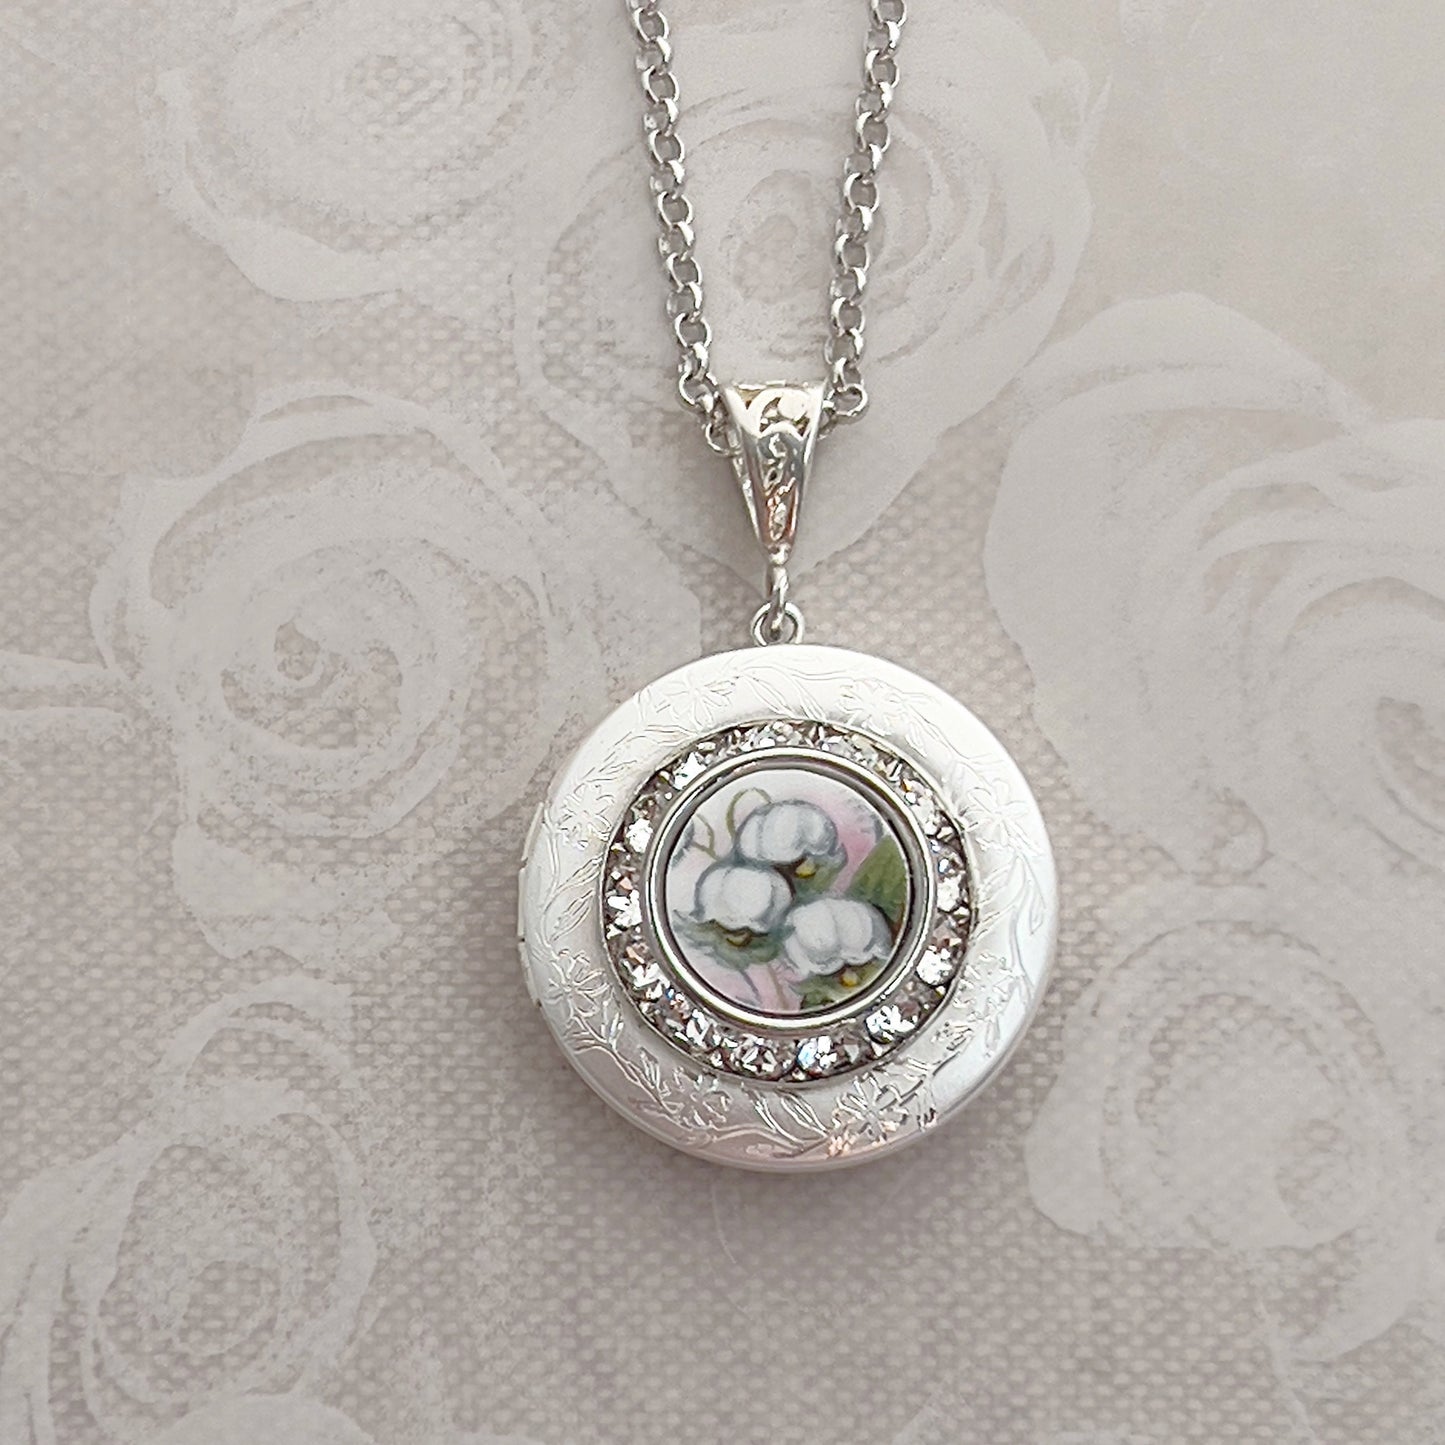 Lily of the Valley Photo Locket Necklace, Broken China Jewelry, Unique Anniversary Gifts for Wife, Vintage China, Gifts for Women